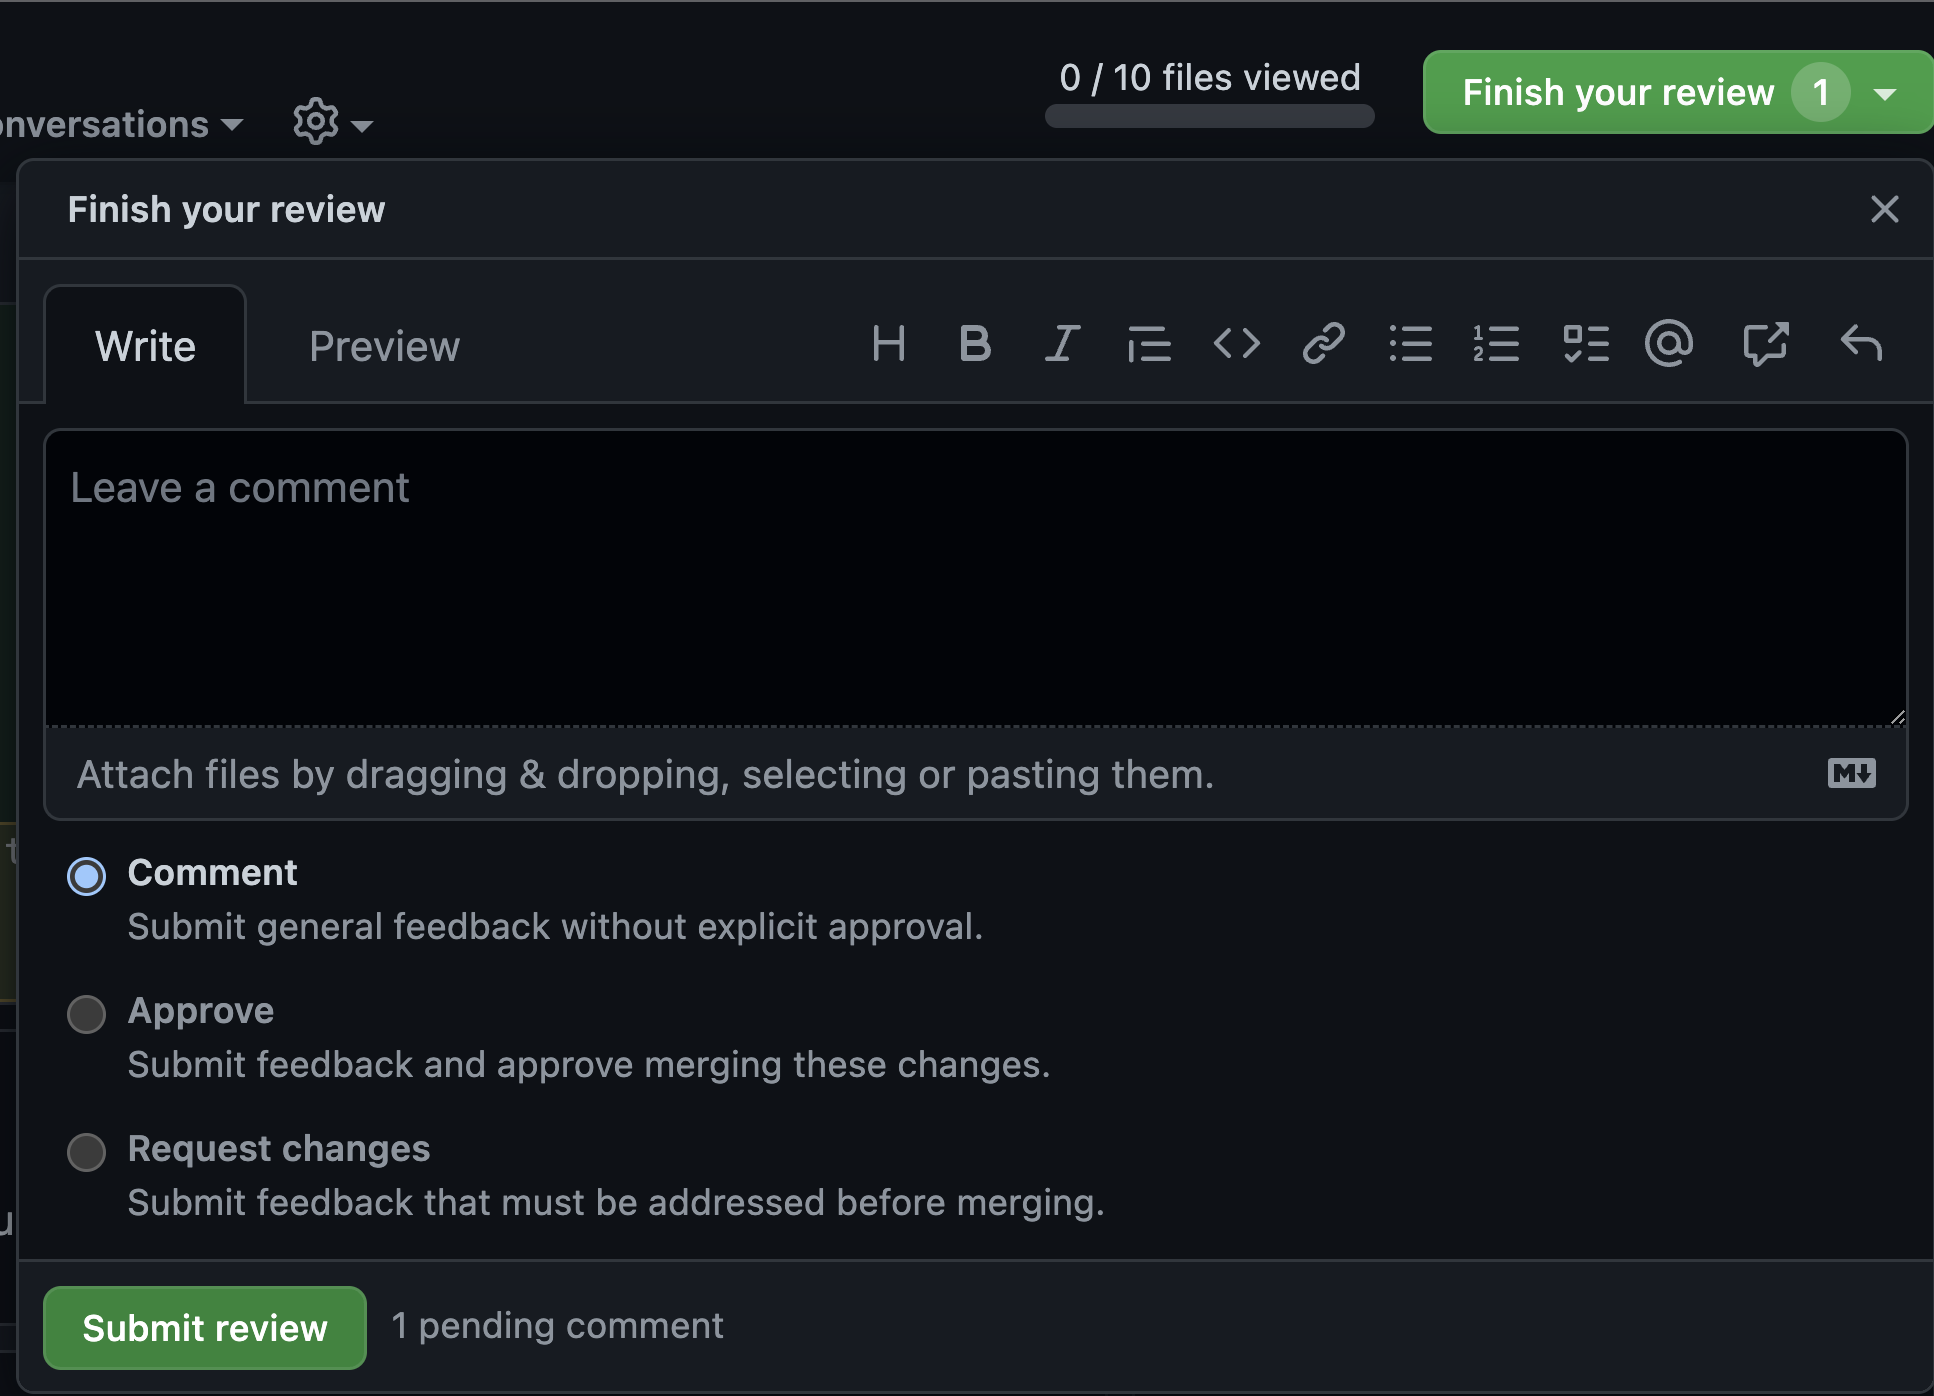 GitHub UI for submitting a review. There is a text area to write comments, and radio buttons with three options for type of feedback submitted: Comment, Approve, and Request changes.